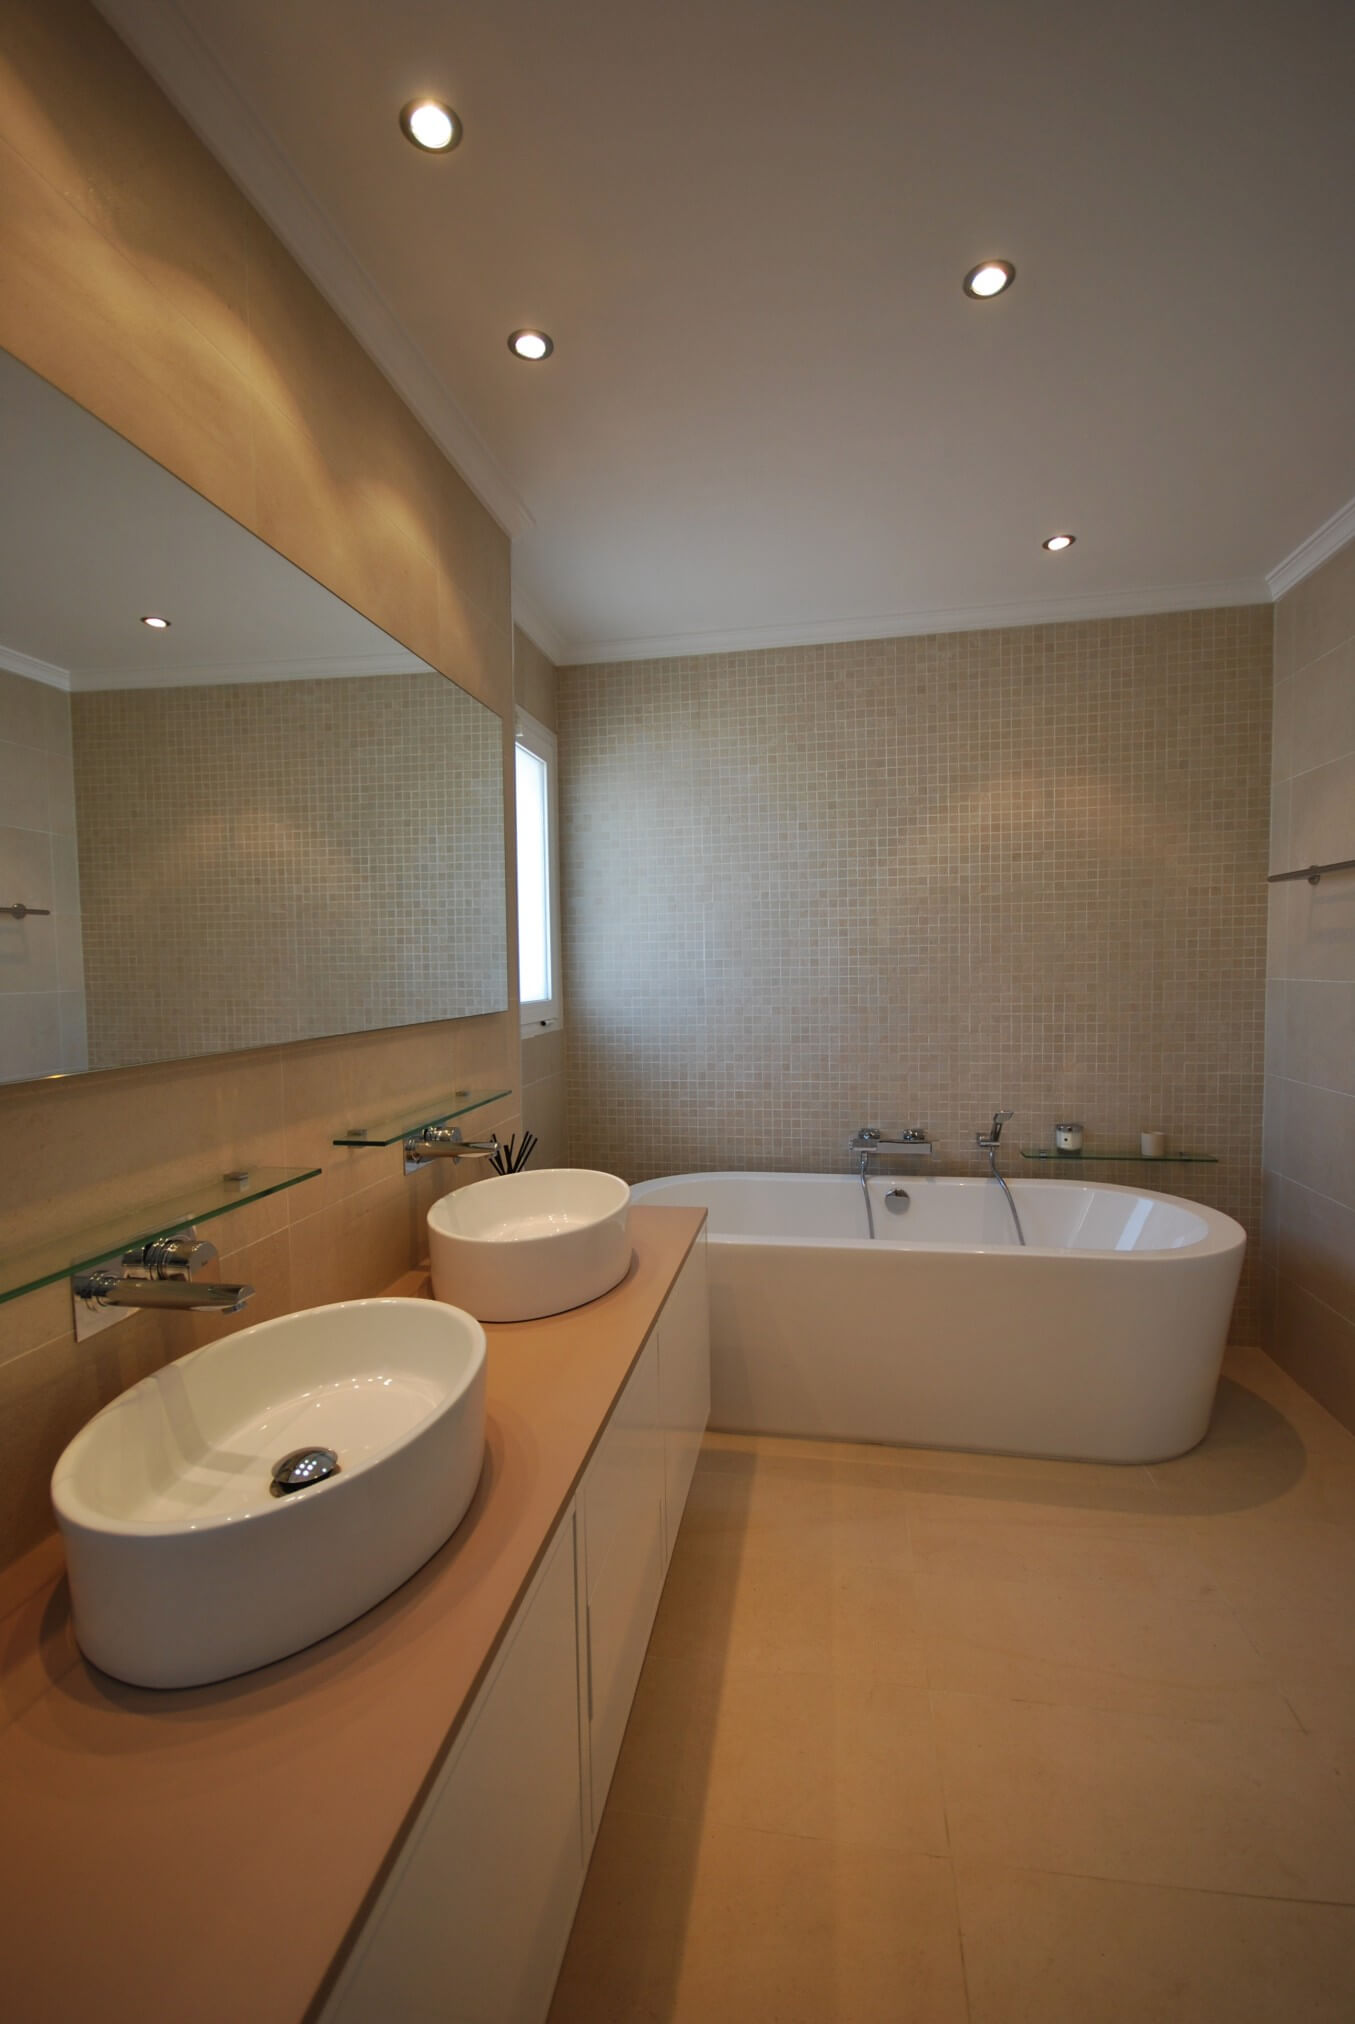 Side view of bathroom and dual-basins